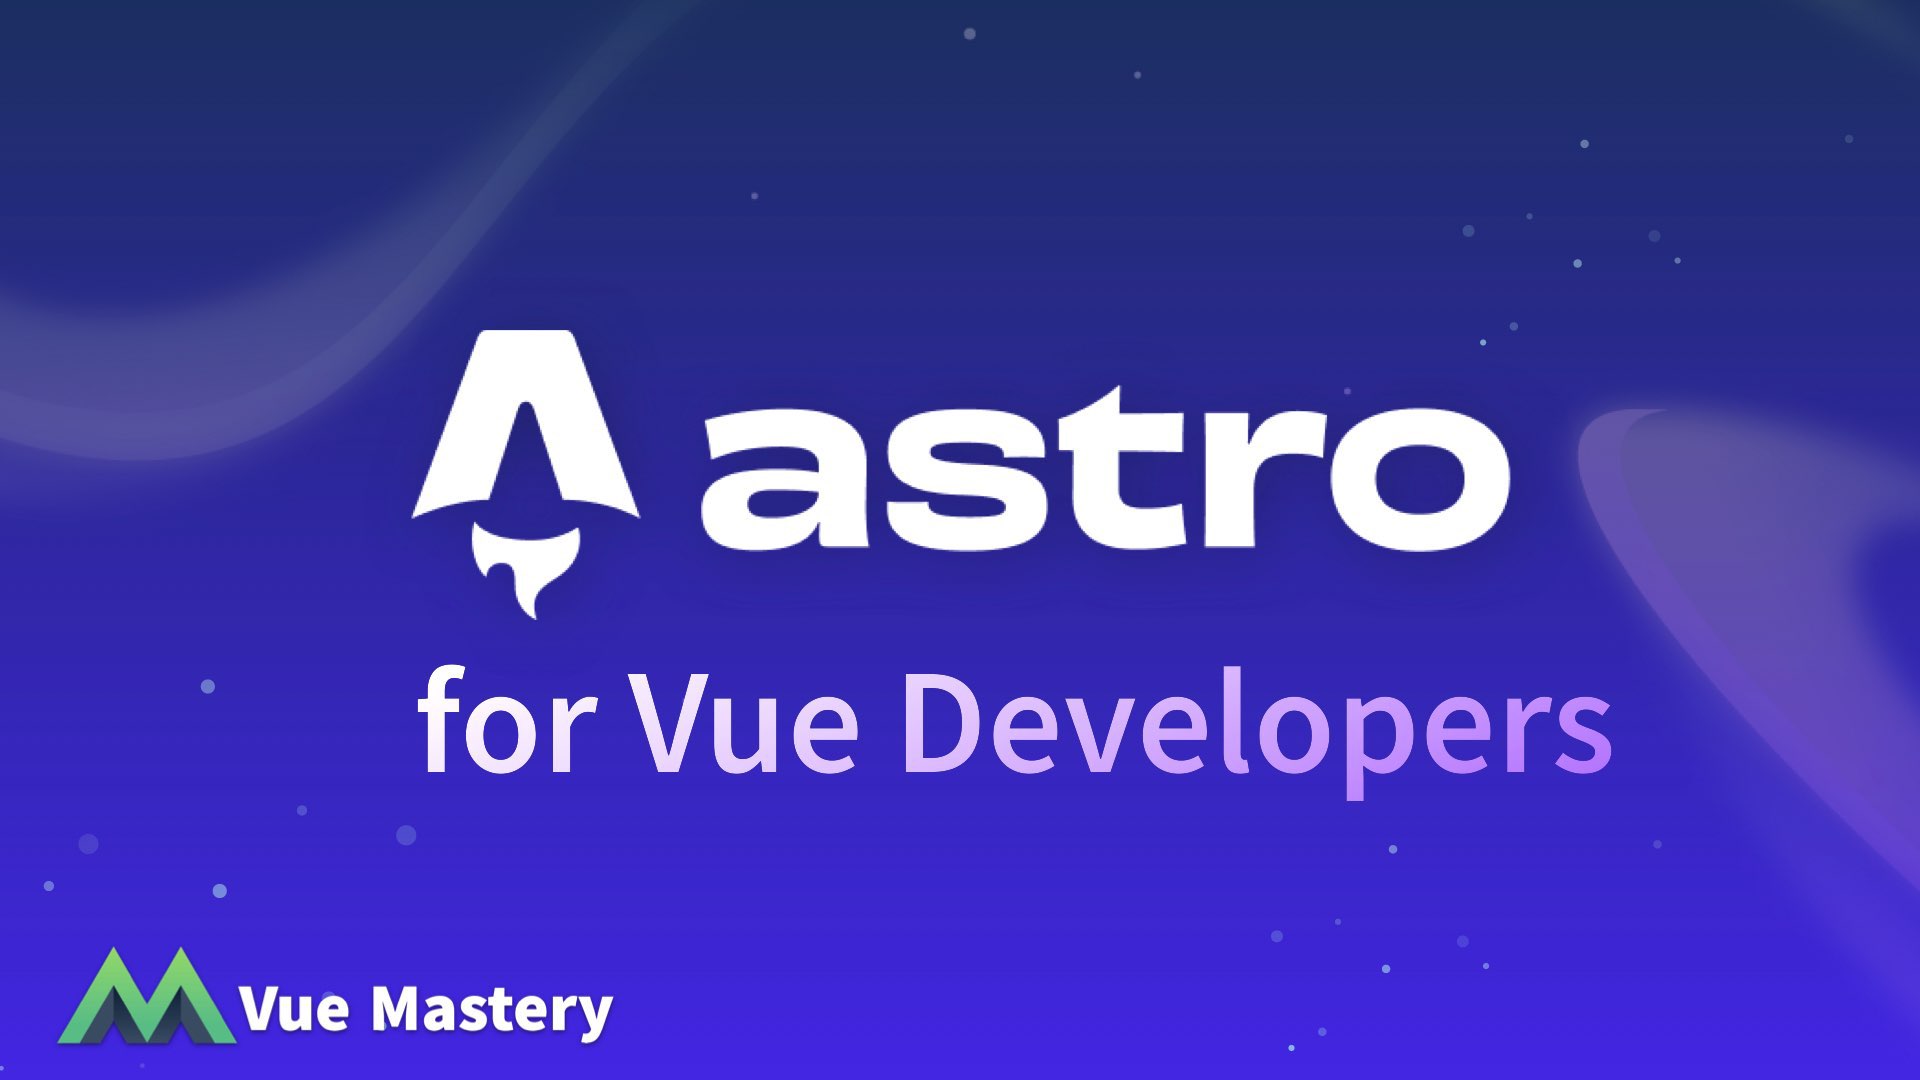 Getting Started with Astro for Vue Developers